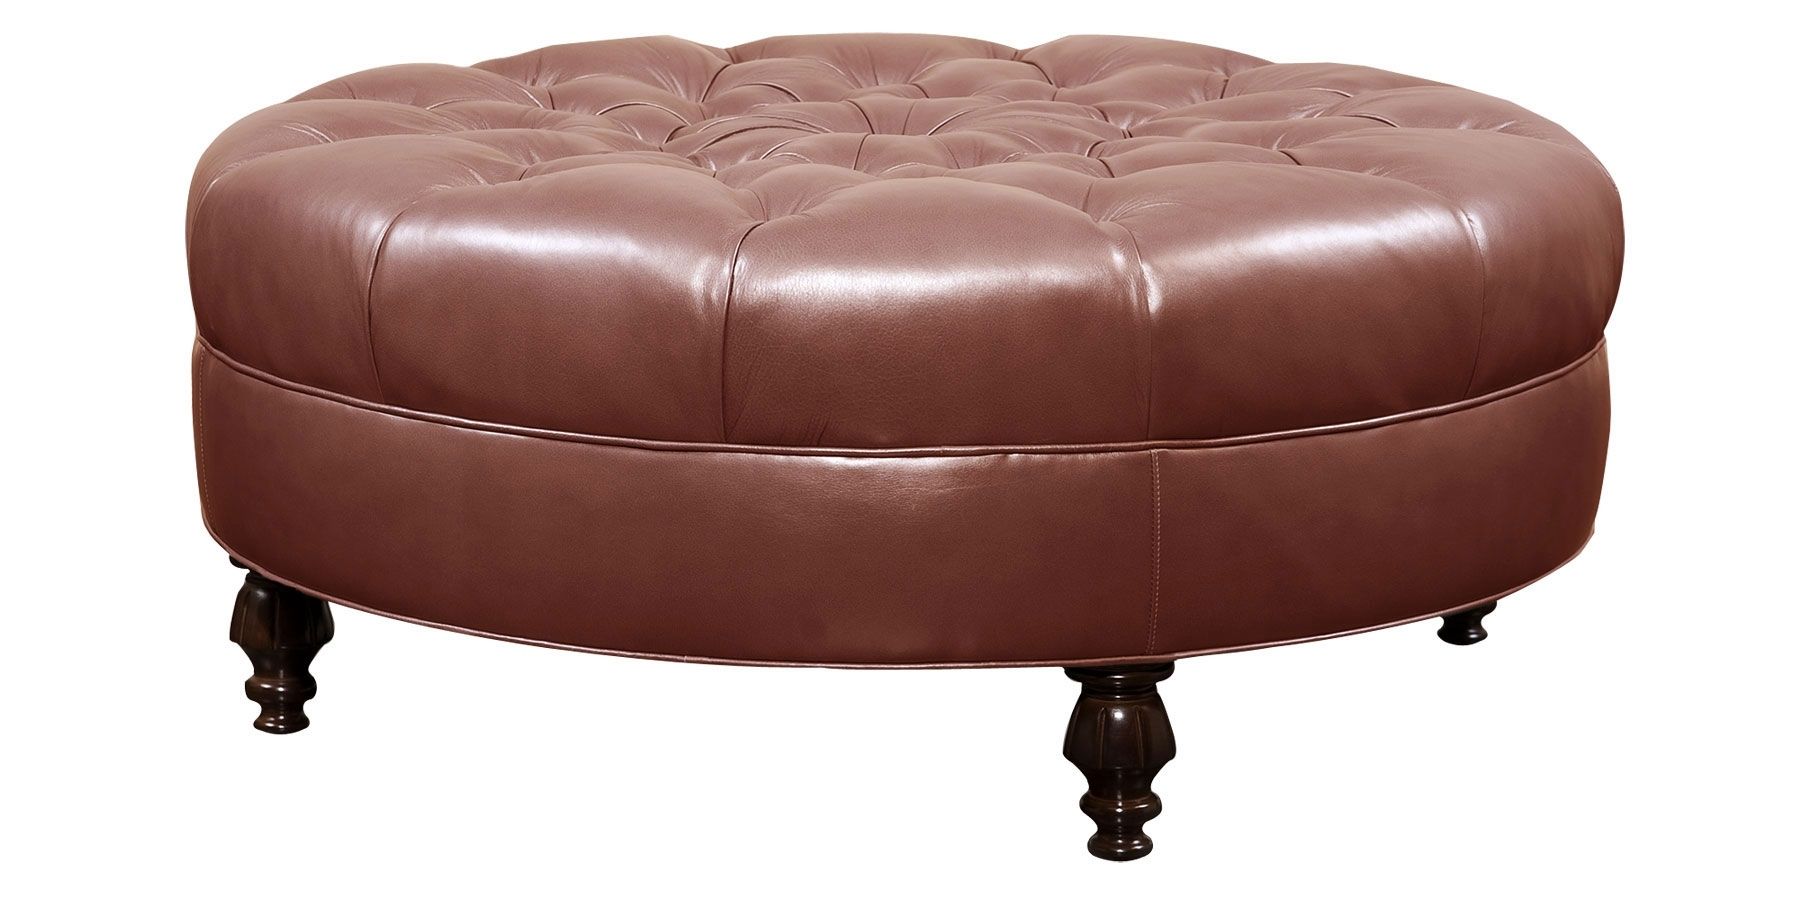 Coffee Table: Large Round Storage Ottoman Coffee Table Idea Of Throughout Round Button Tufted Coffee Tables (View 27 of 30)